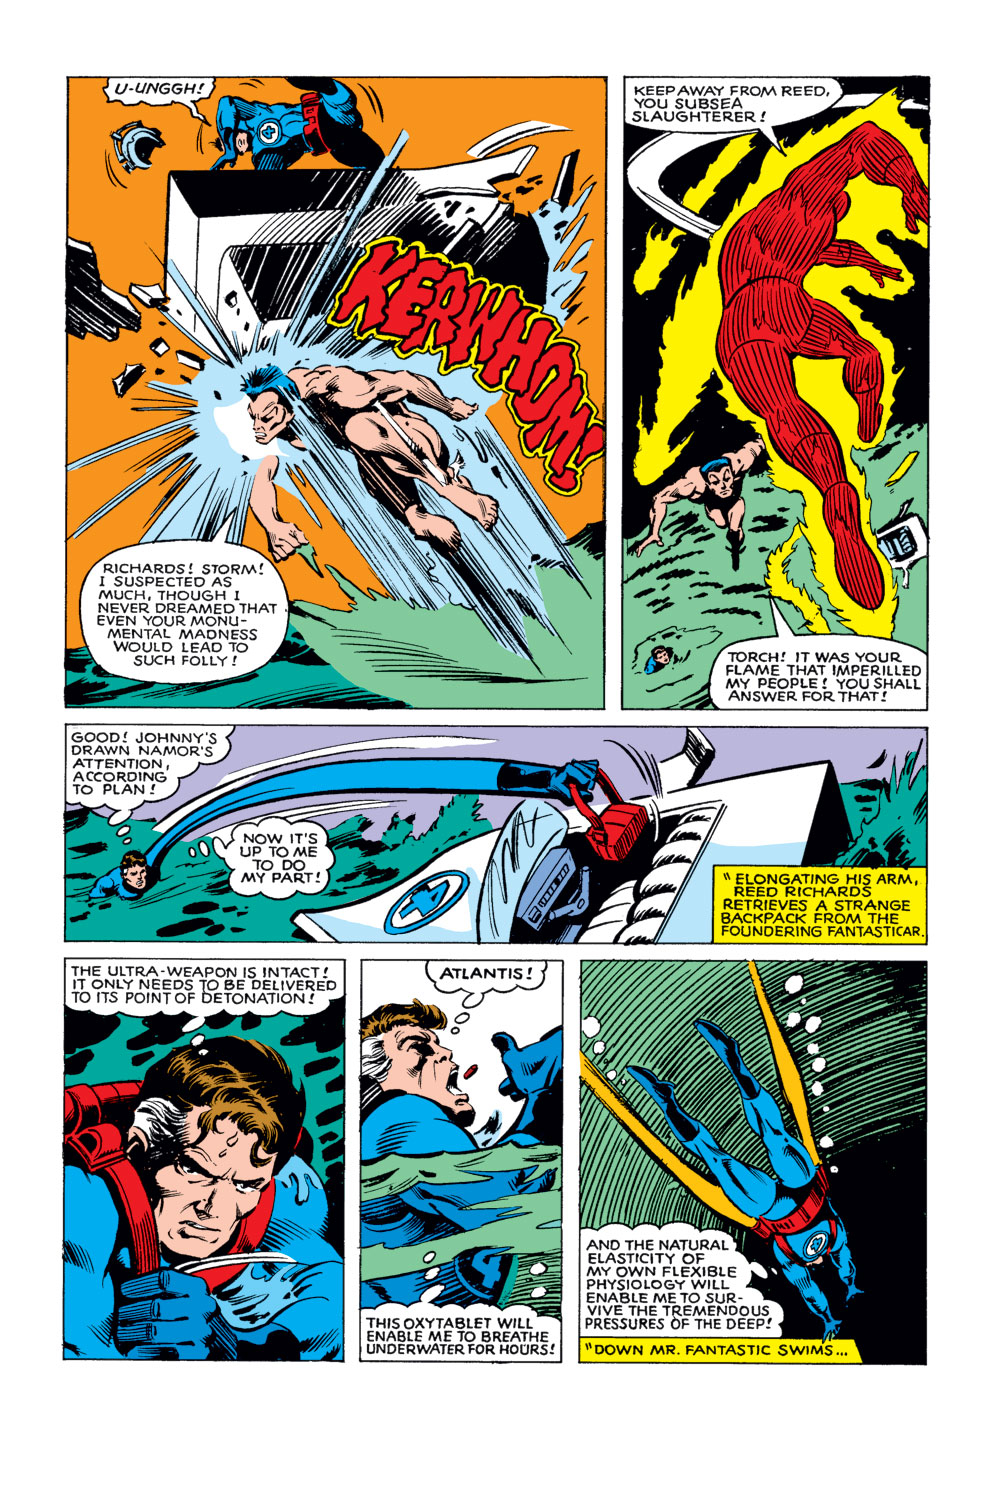 What If? (1977) issue 21 - Invisible Girl of the Fantastic Four married the Sub-Mariner - Page 20